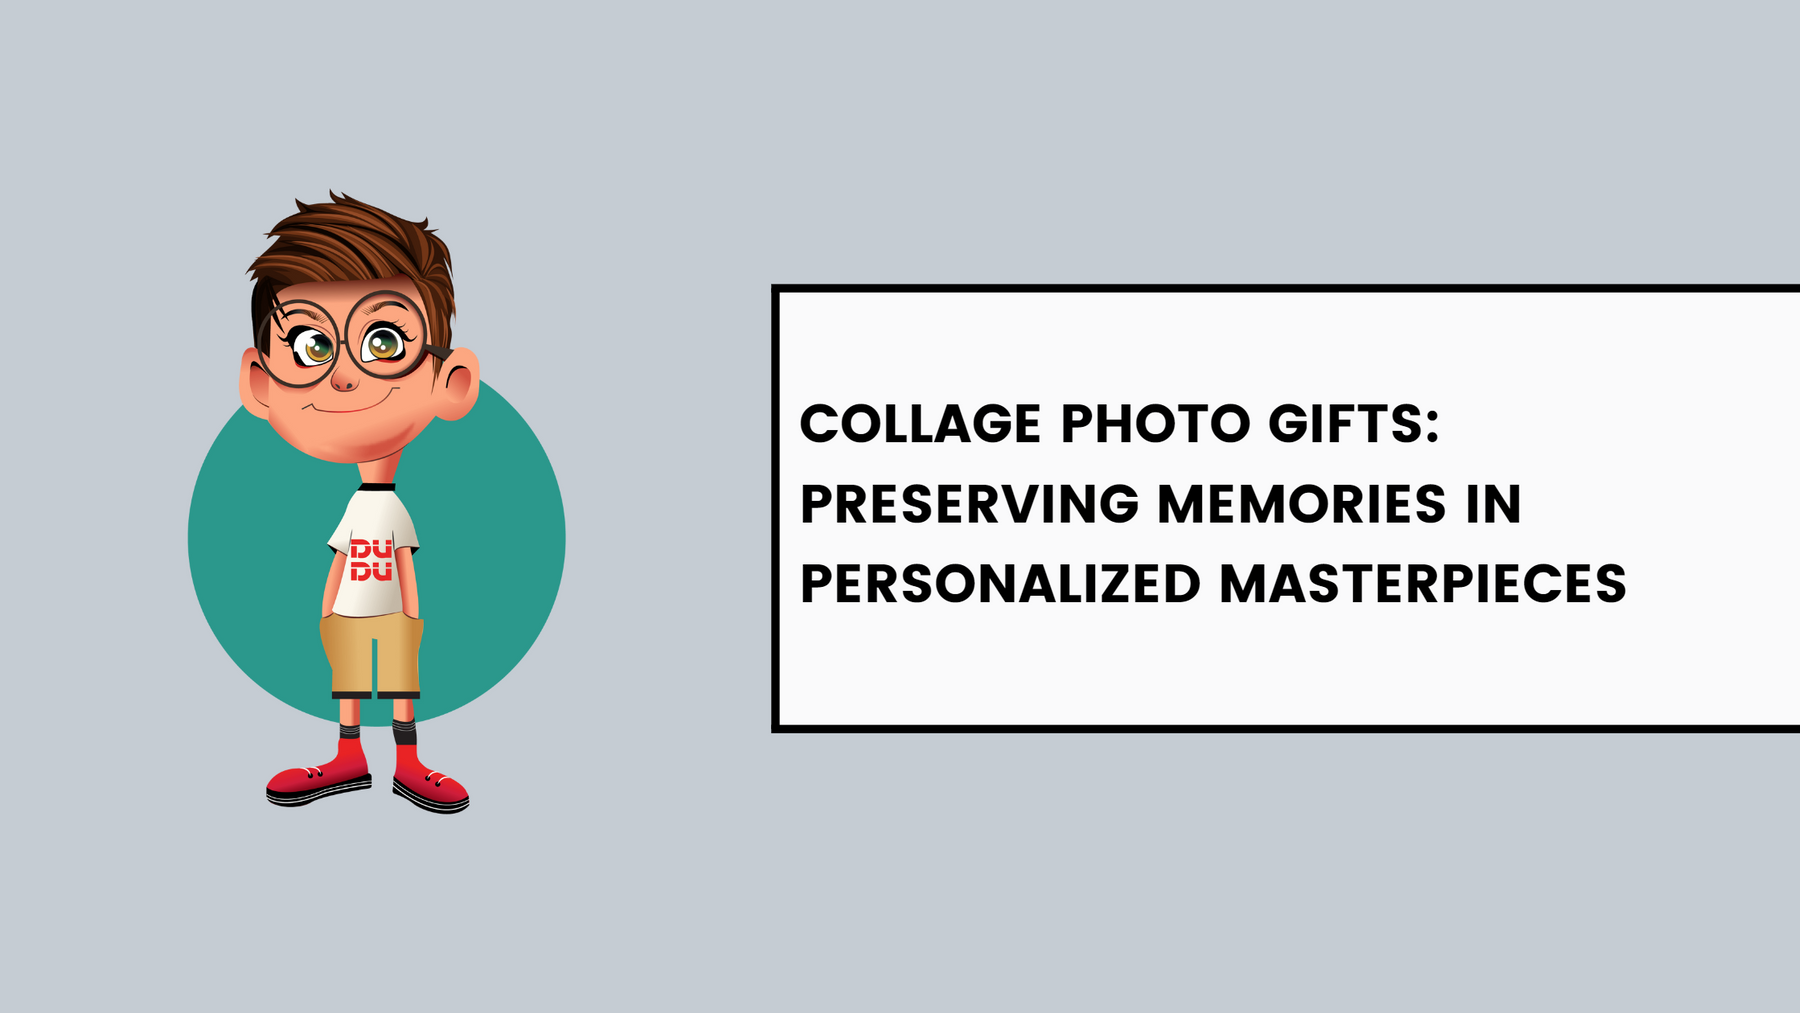 Collage Photo Gifts: Preserving Memories in Personalized Masterpieces